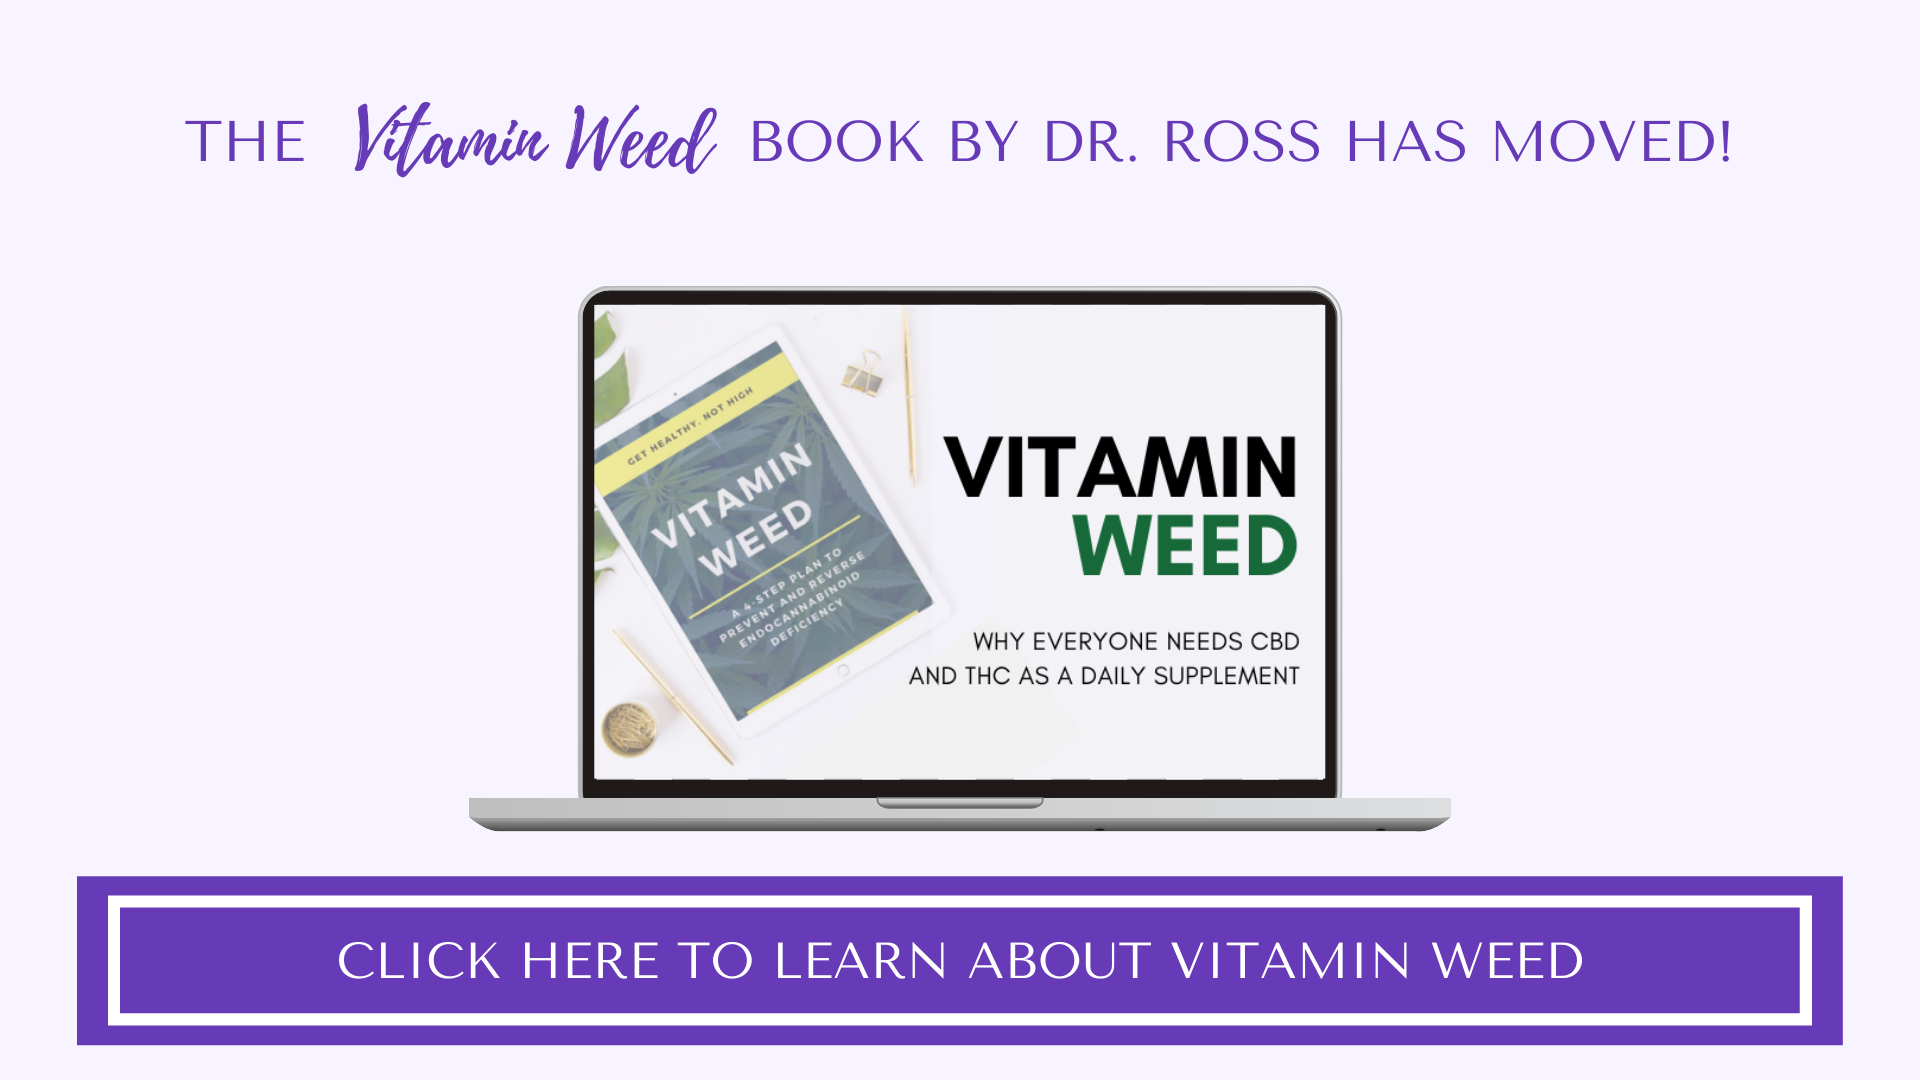 Vitamin Weed Book Has Moved